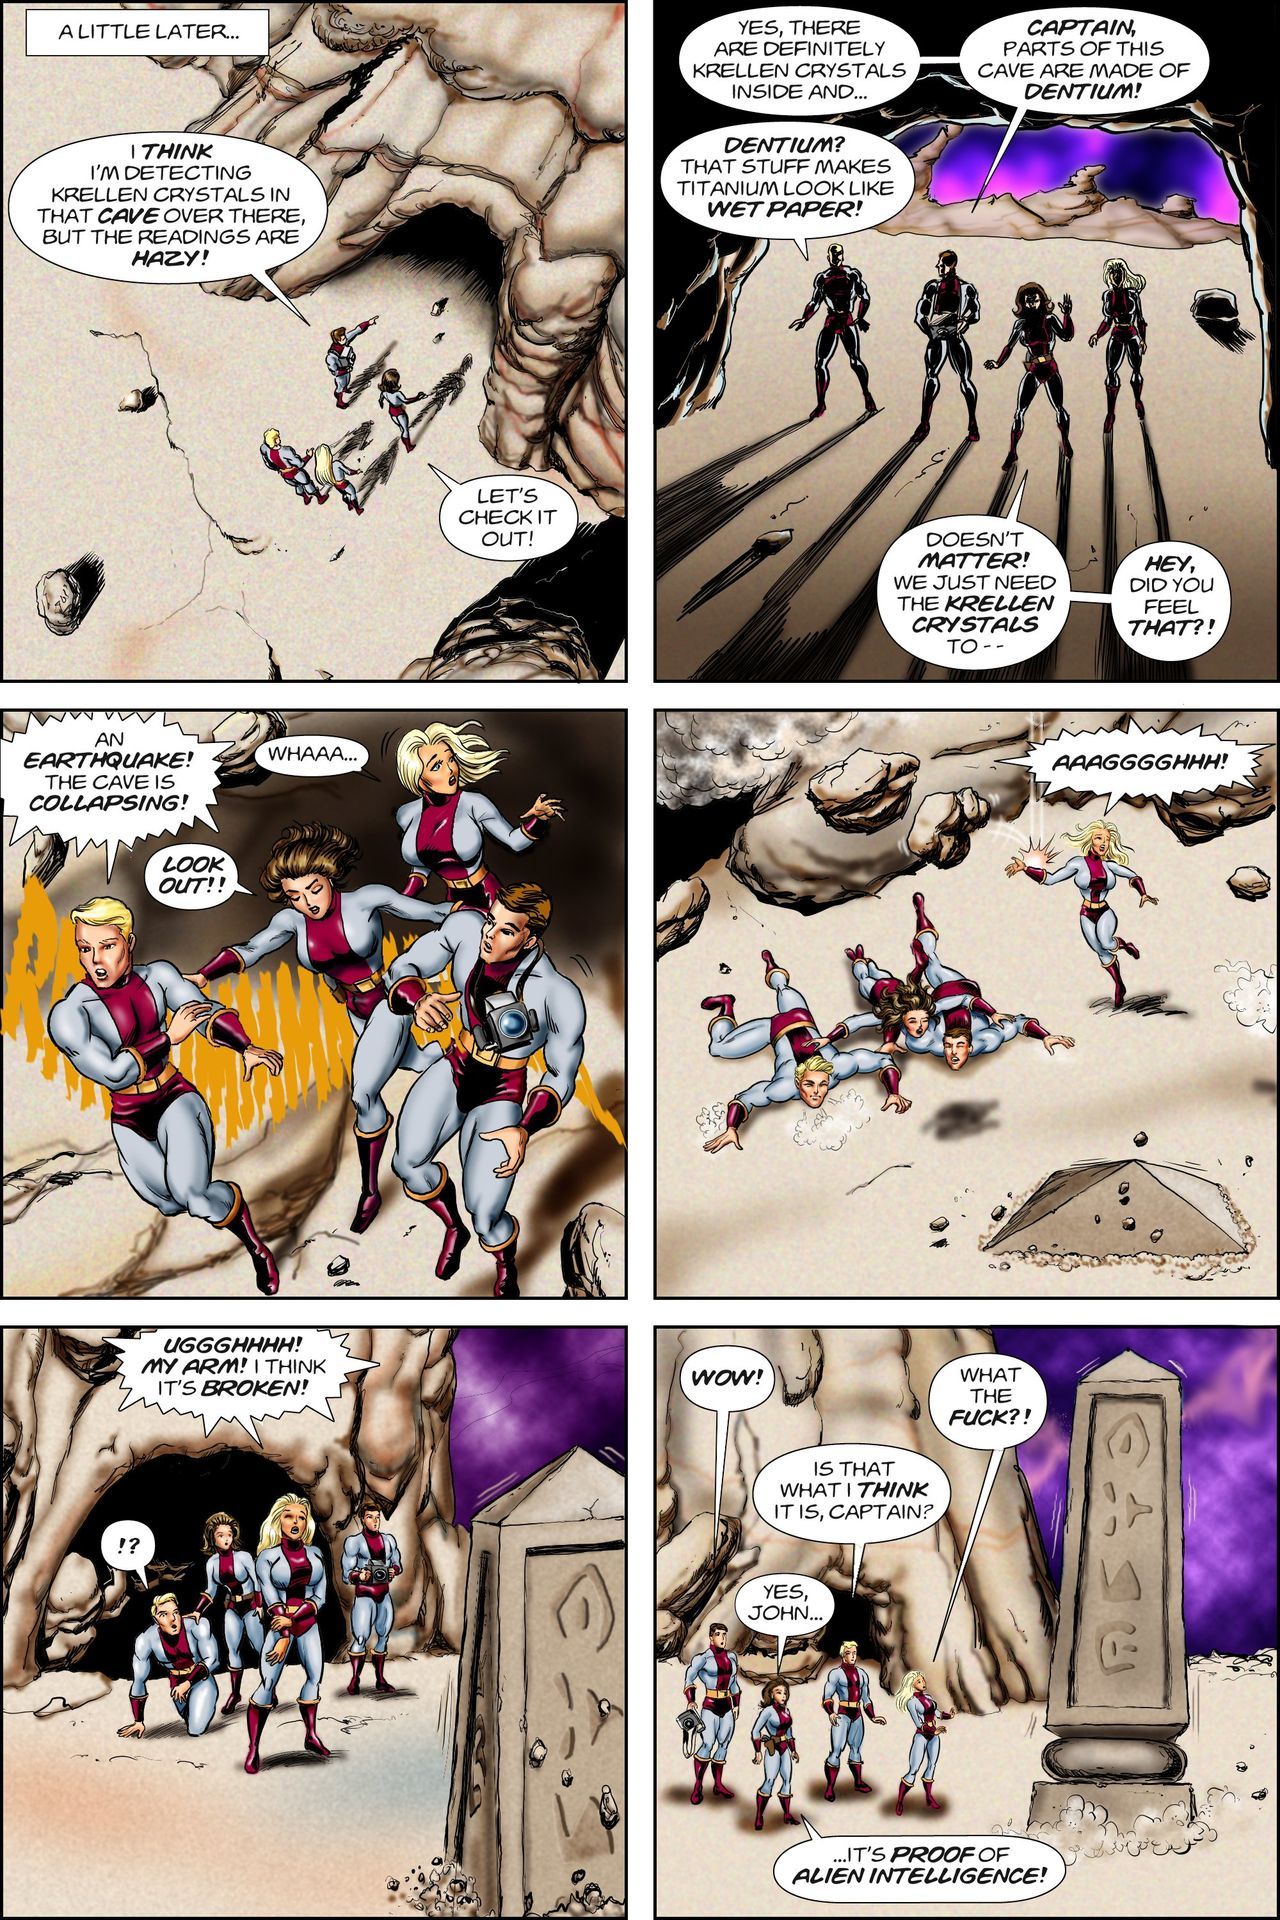 Battle of the Space Amazons David C. Matthews page 7